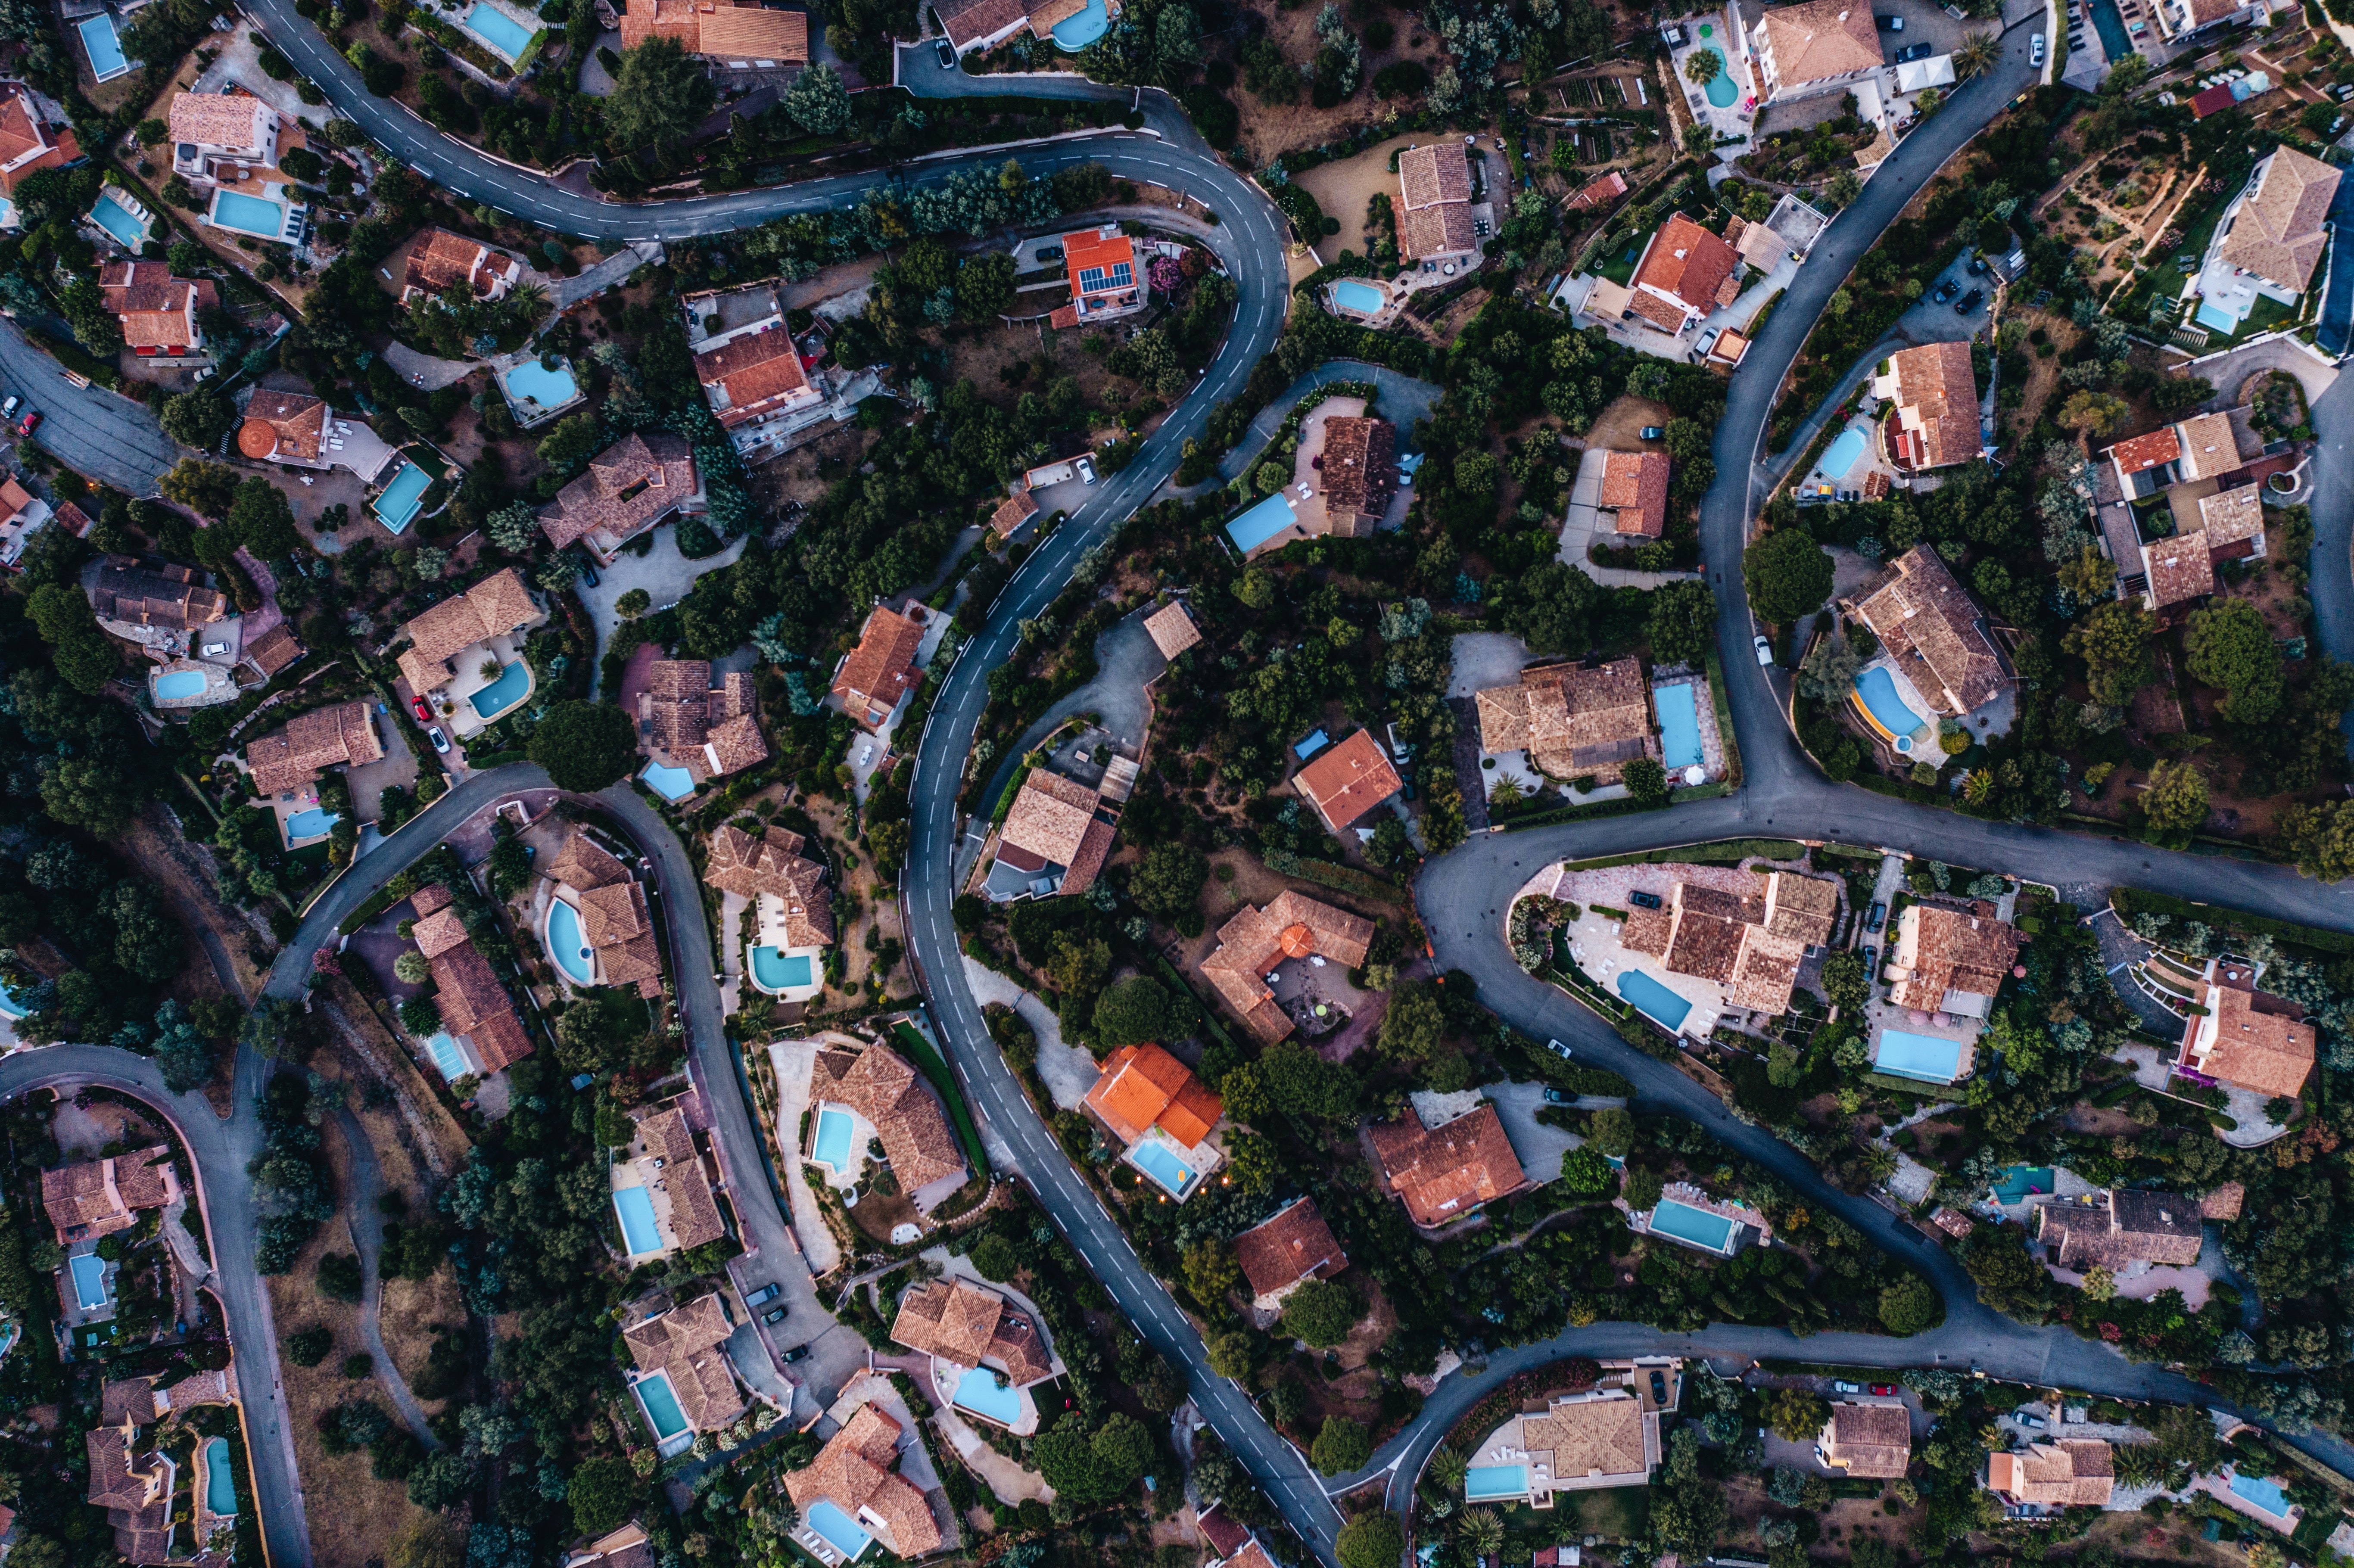 view from above, houses, miscellanea, miscellaneous, road, winding, sinuous